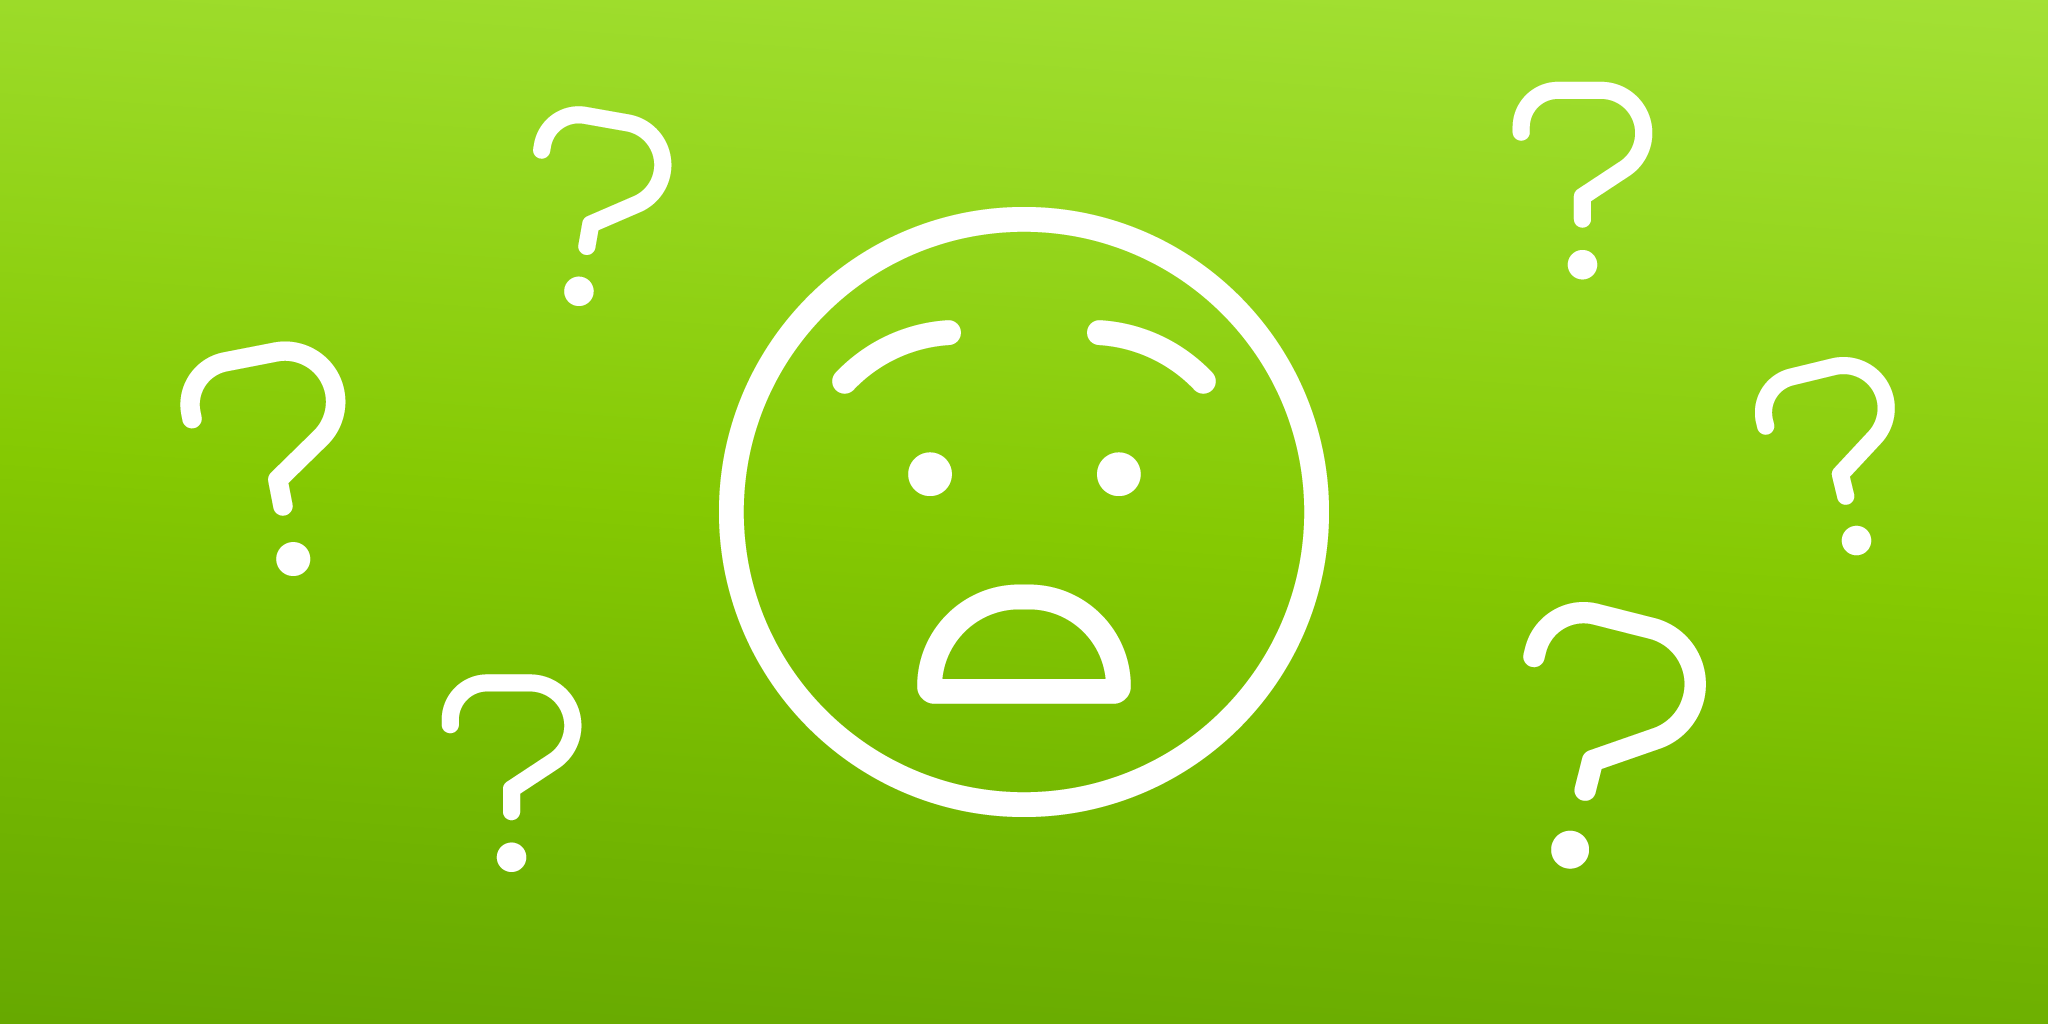 Green background with confused face and question marks